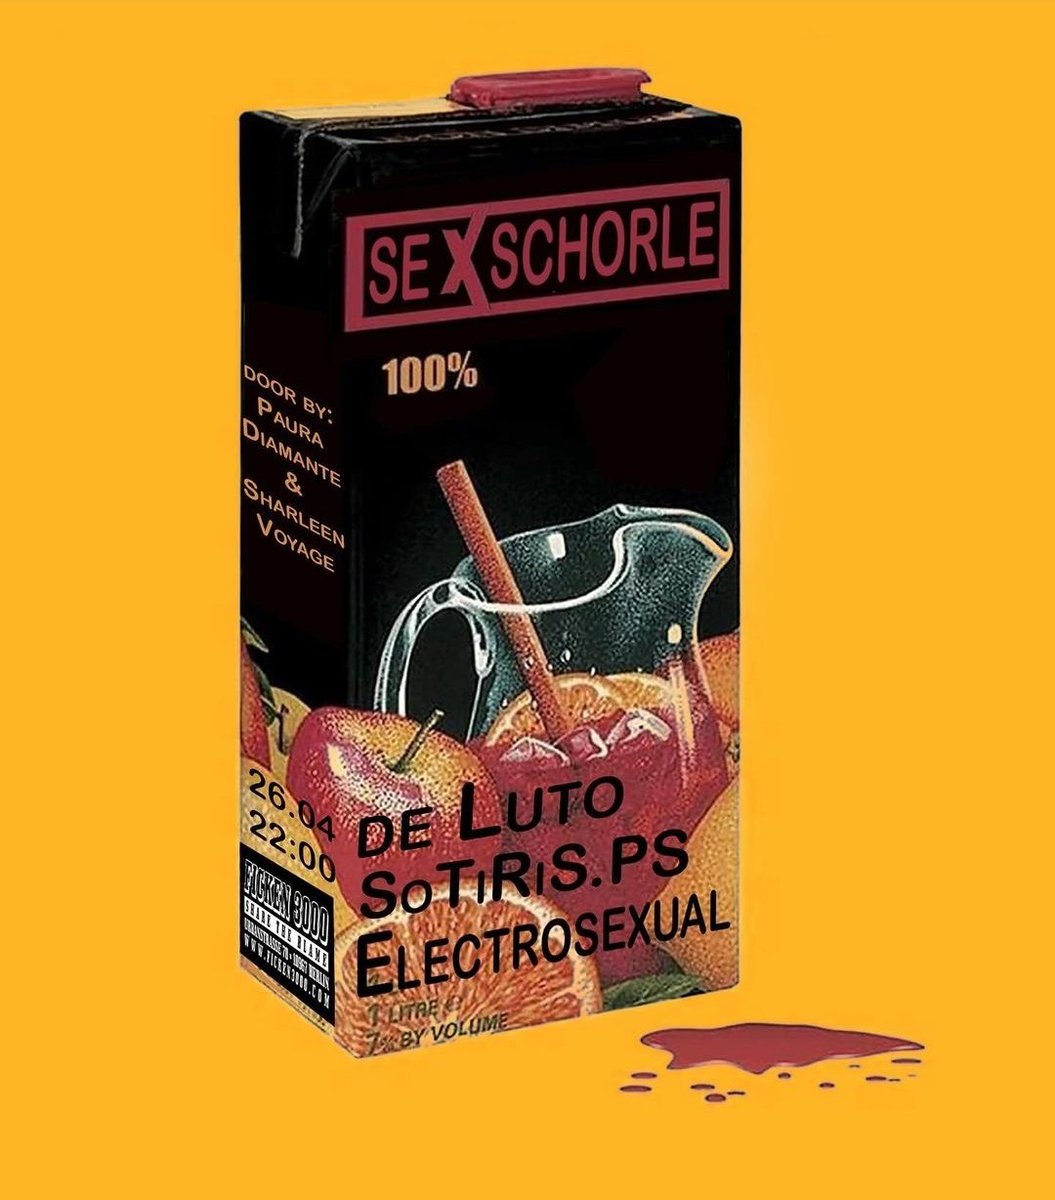 Friday is the infamous #Sexschorle in #Ficken3000 Berlin.